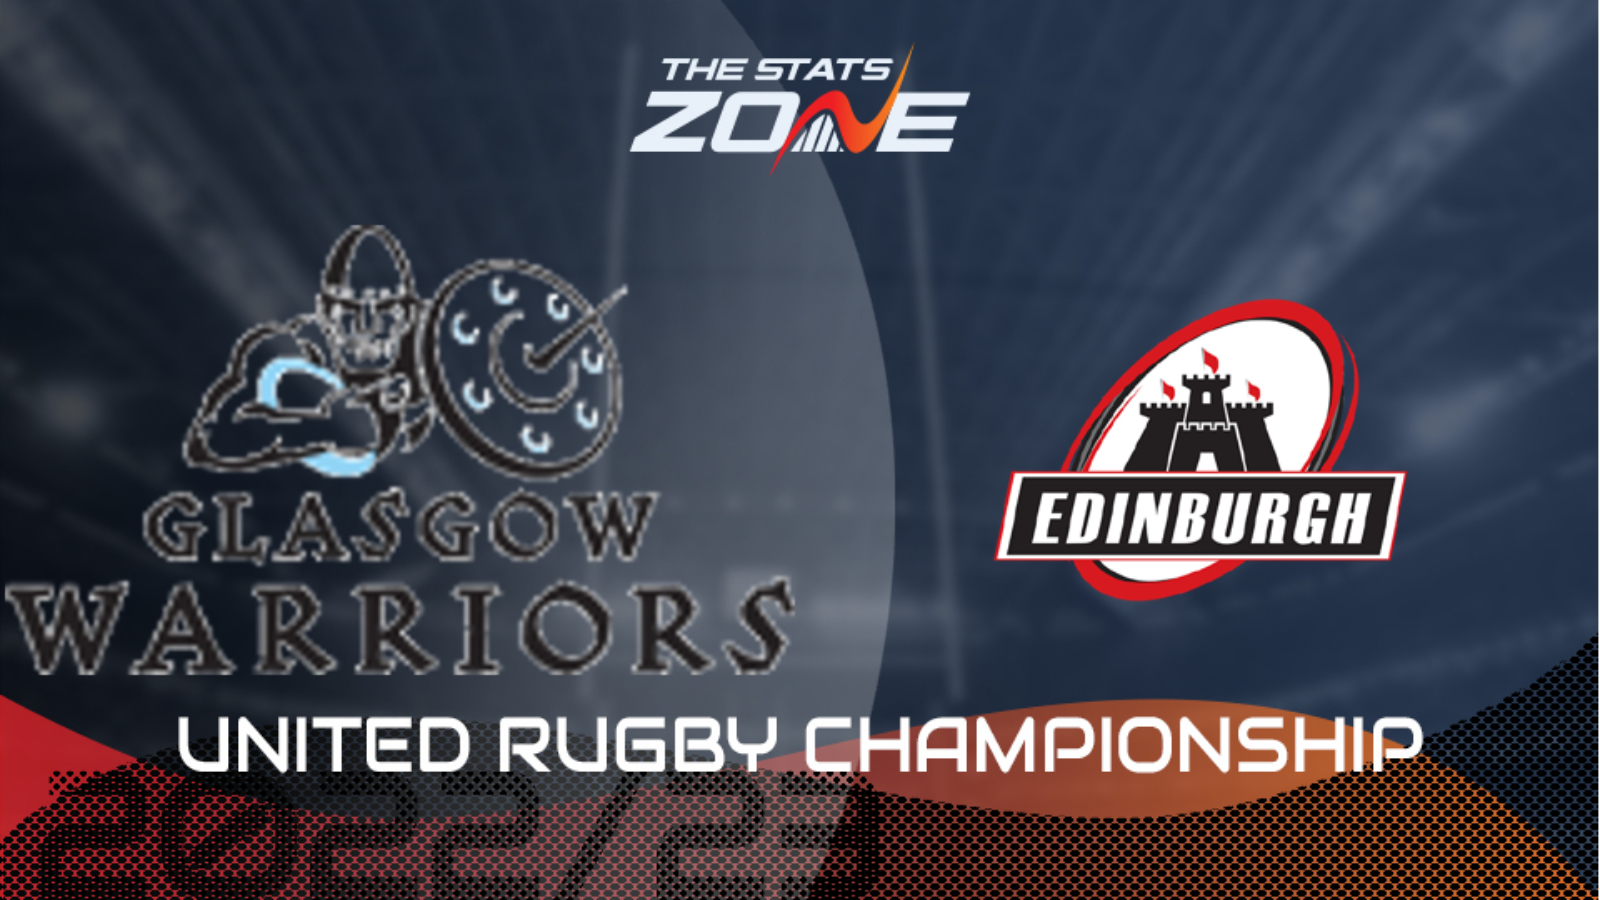 Glasgow Warriors vs Edinburgh Preview and Prediction 2022-23 United Rugby Championship